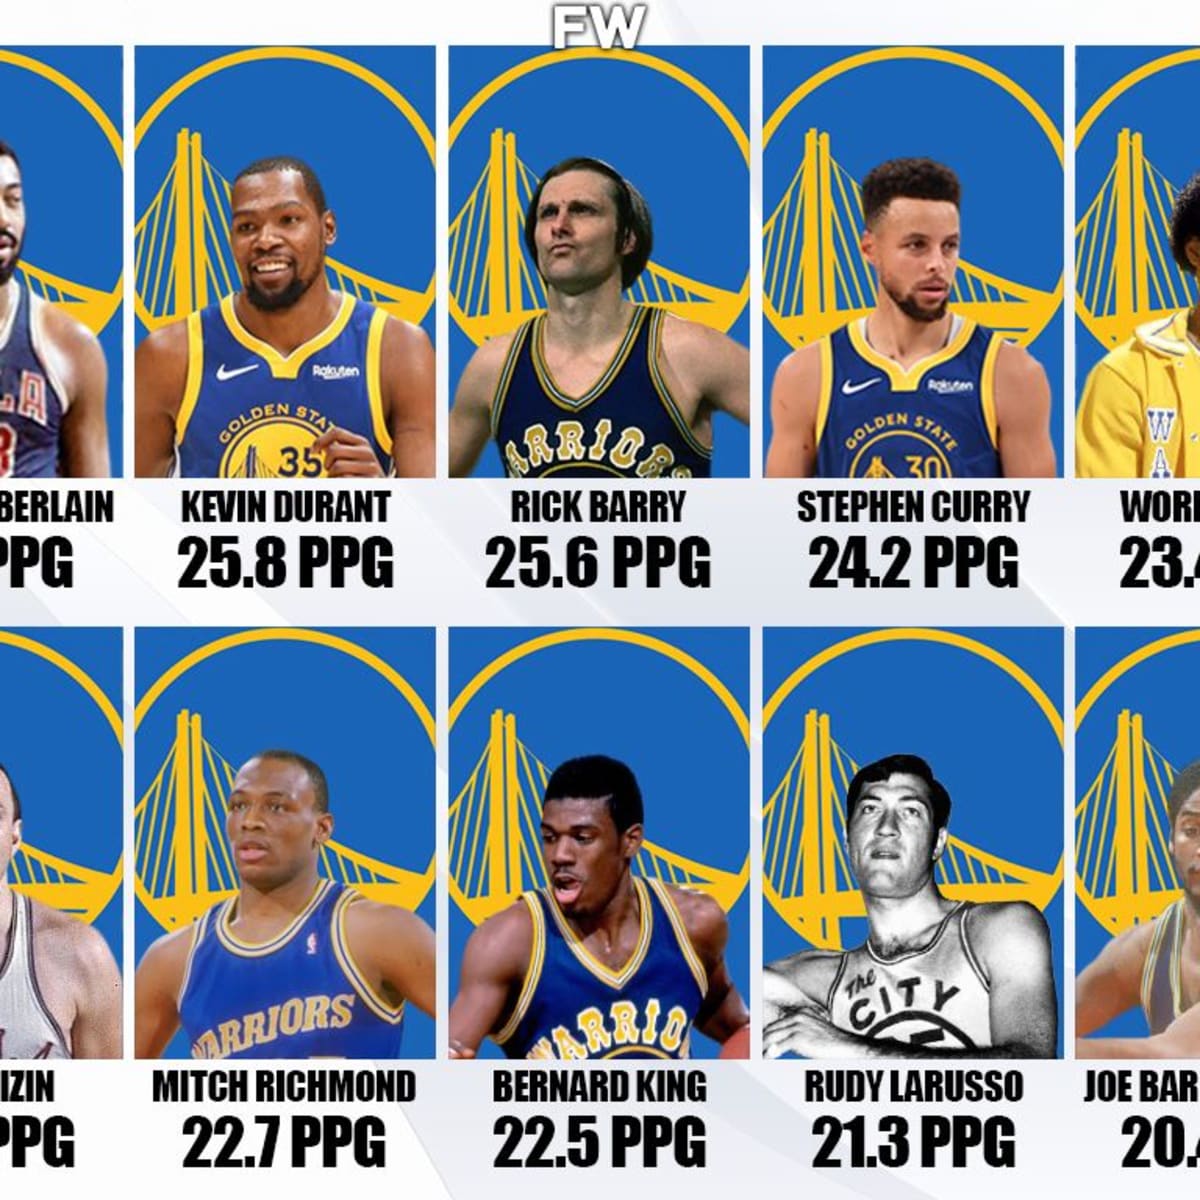 Every jersey in Golden State Warriors history, ranked